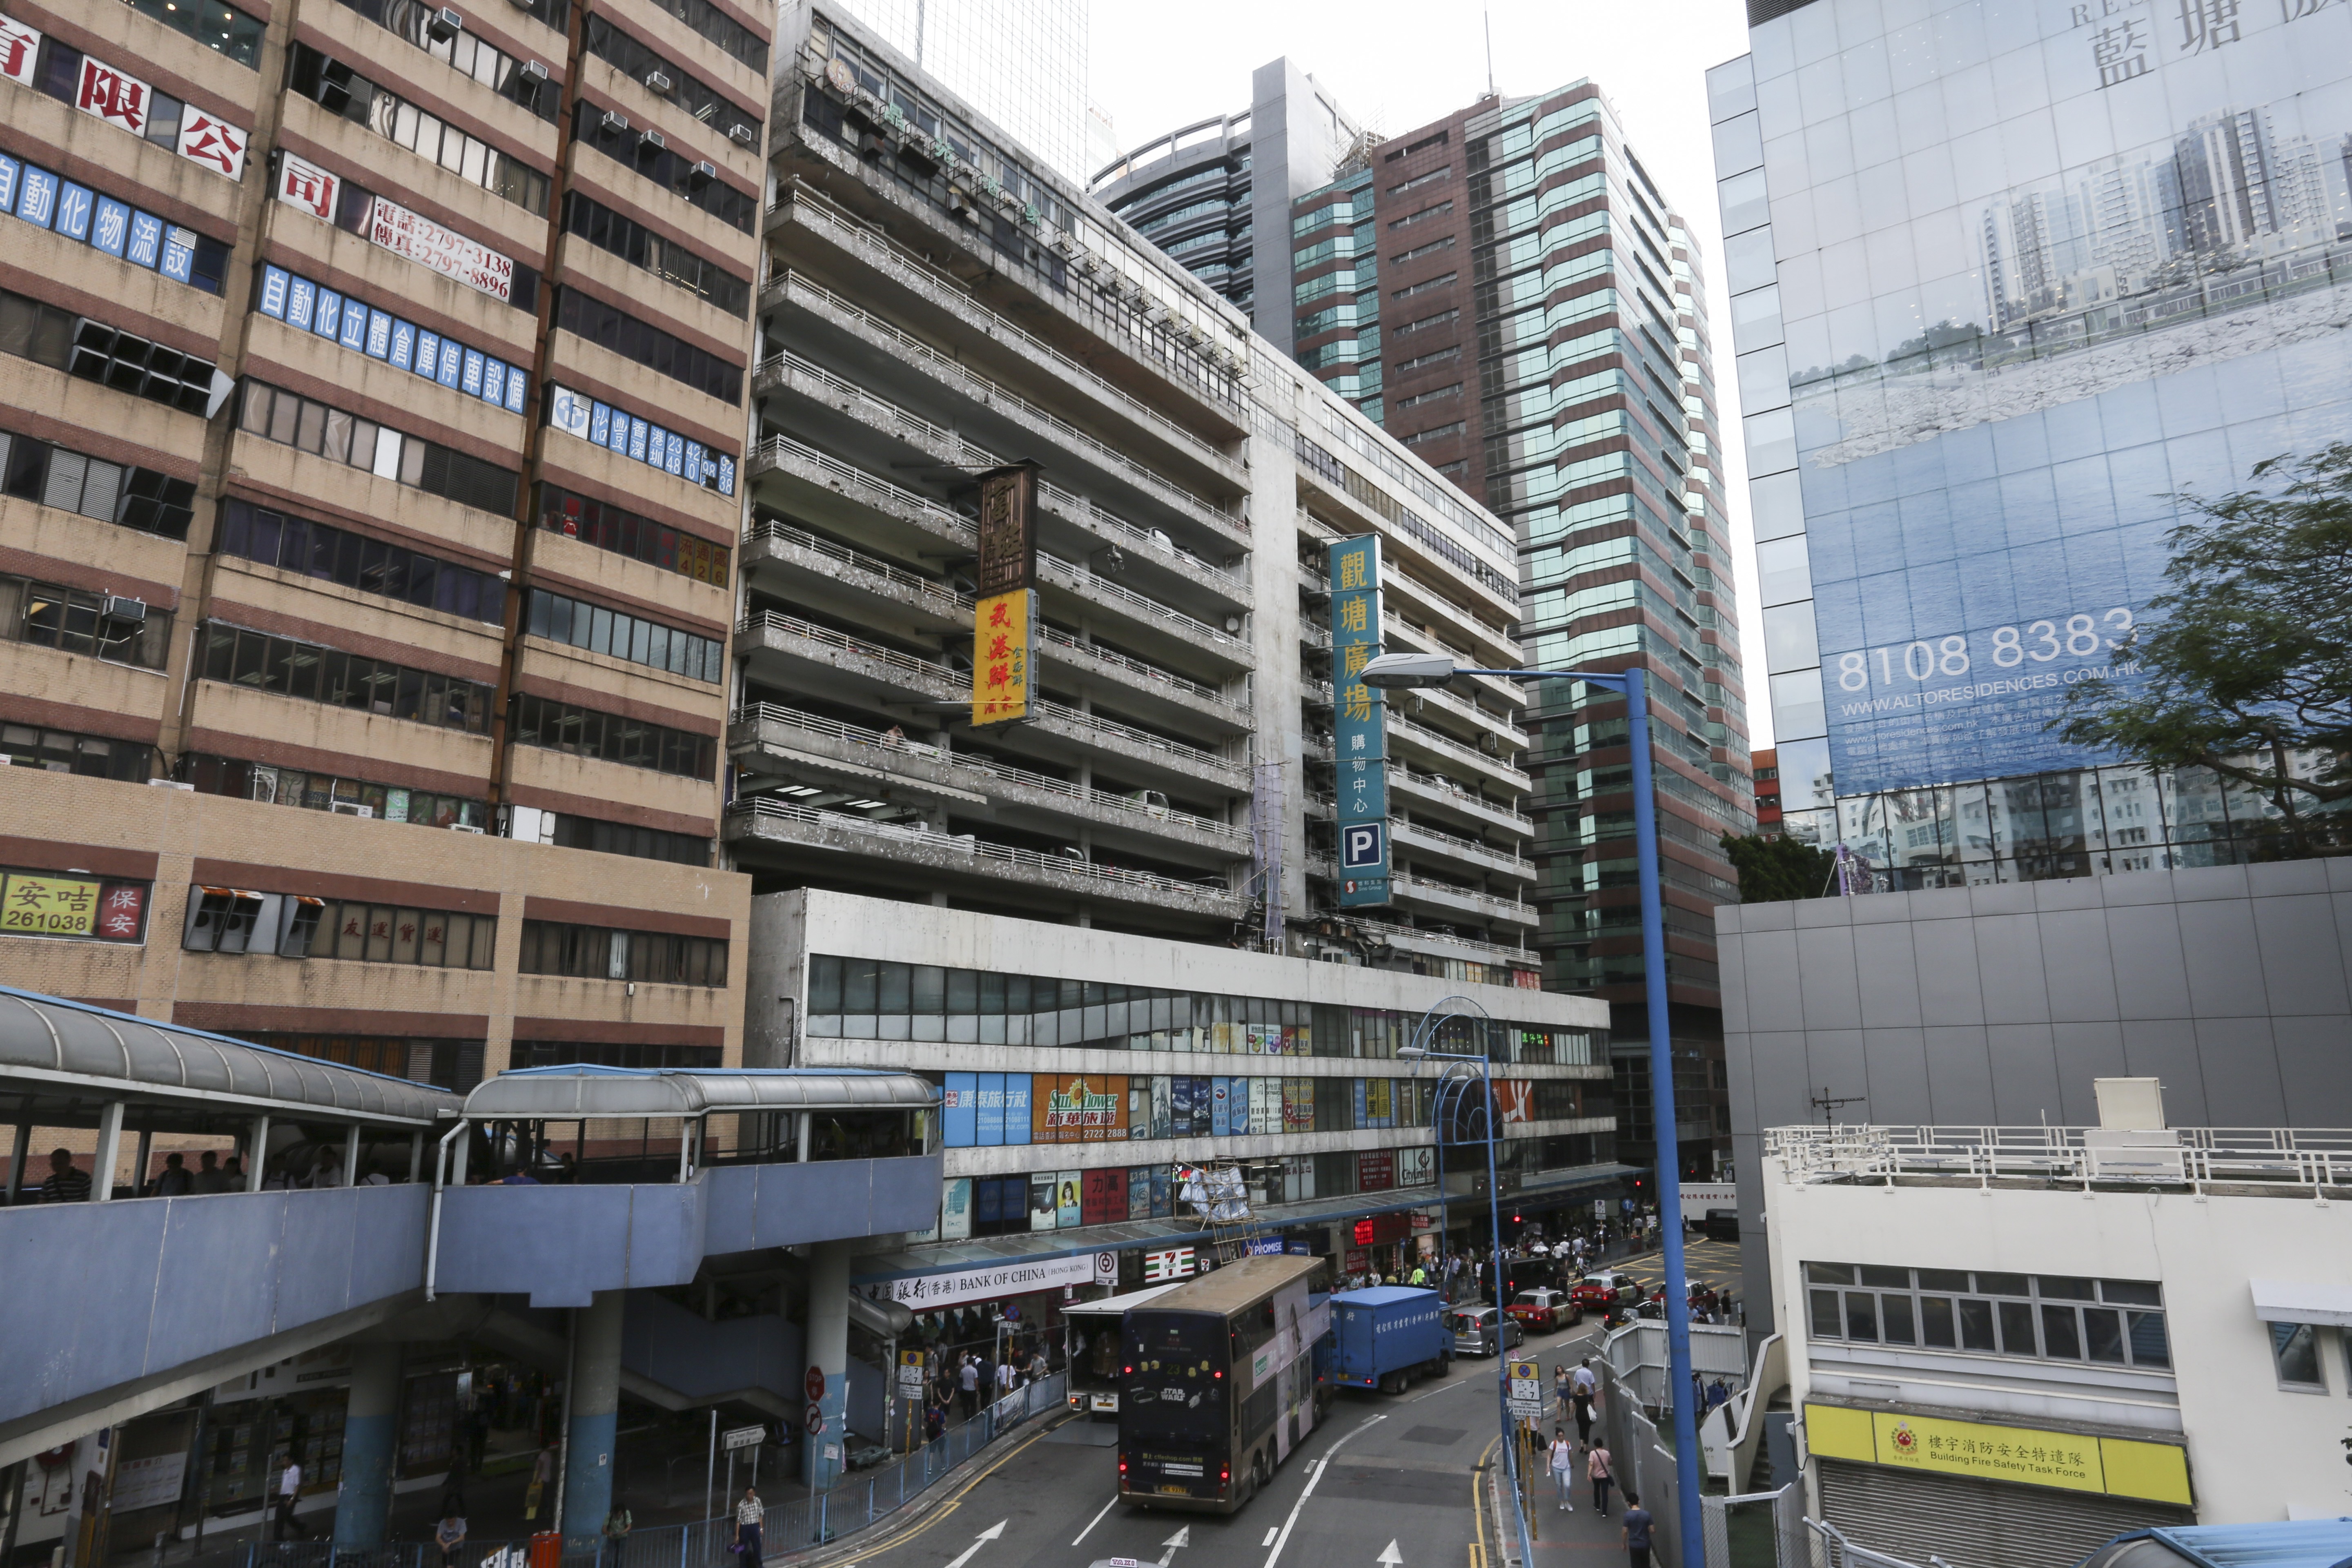 Only 9 per cent of the 1,149,000 registered corporations in Hong Kong in 2014/15 paid tax. Photo: Jonathan Wong